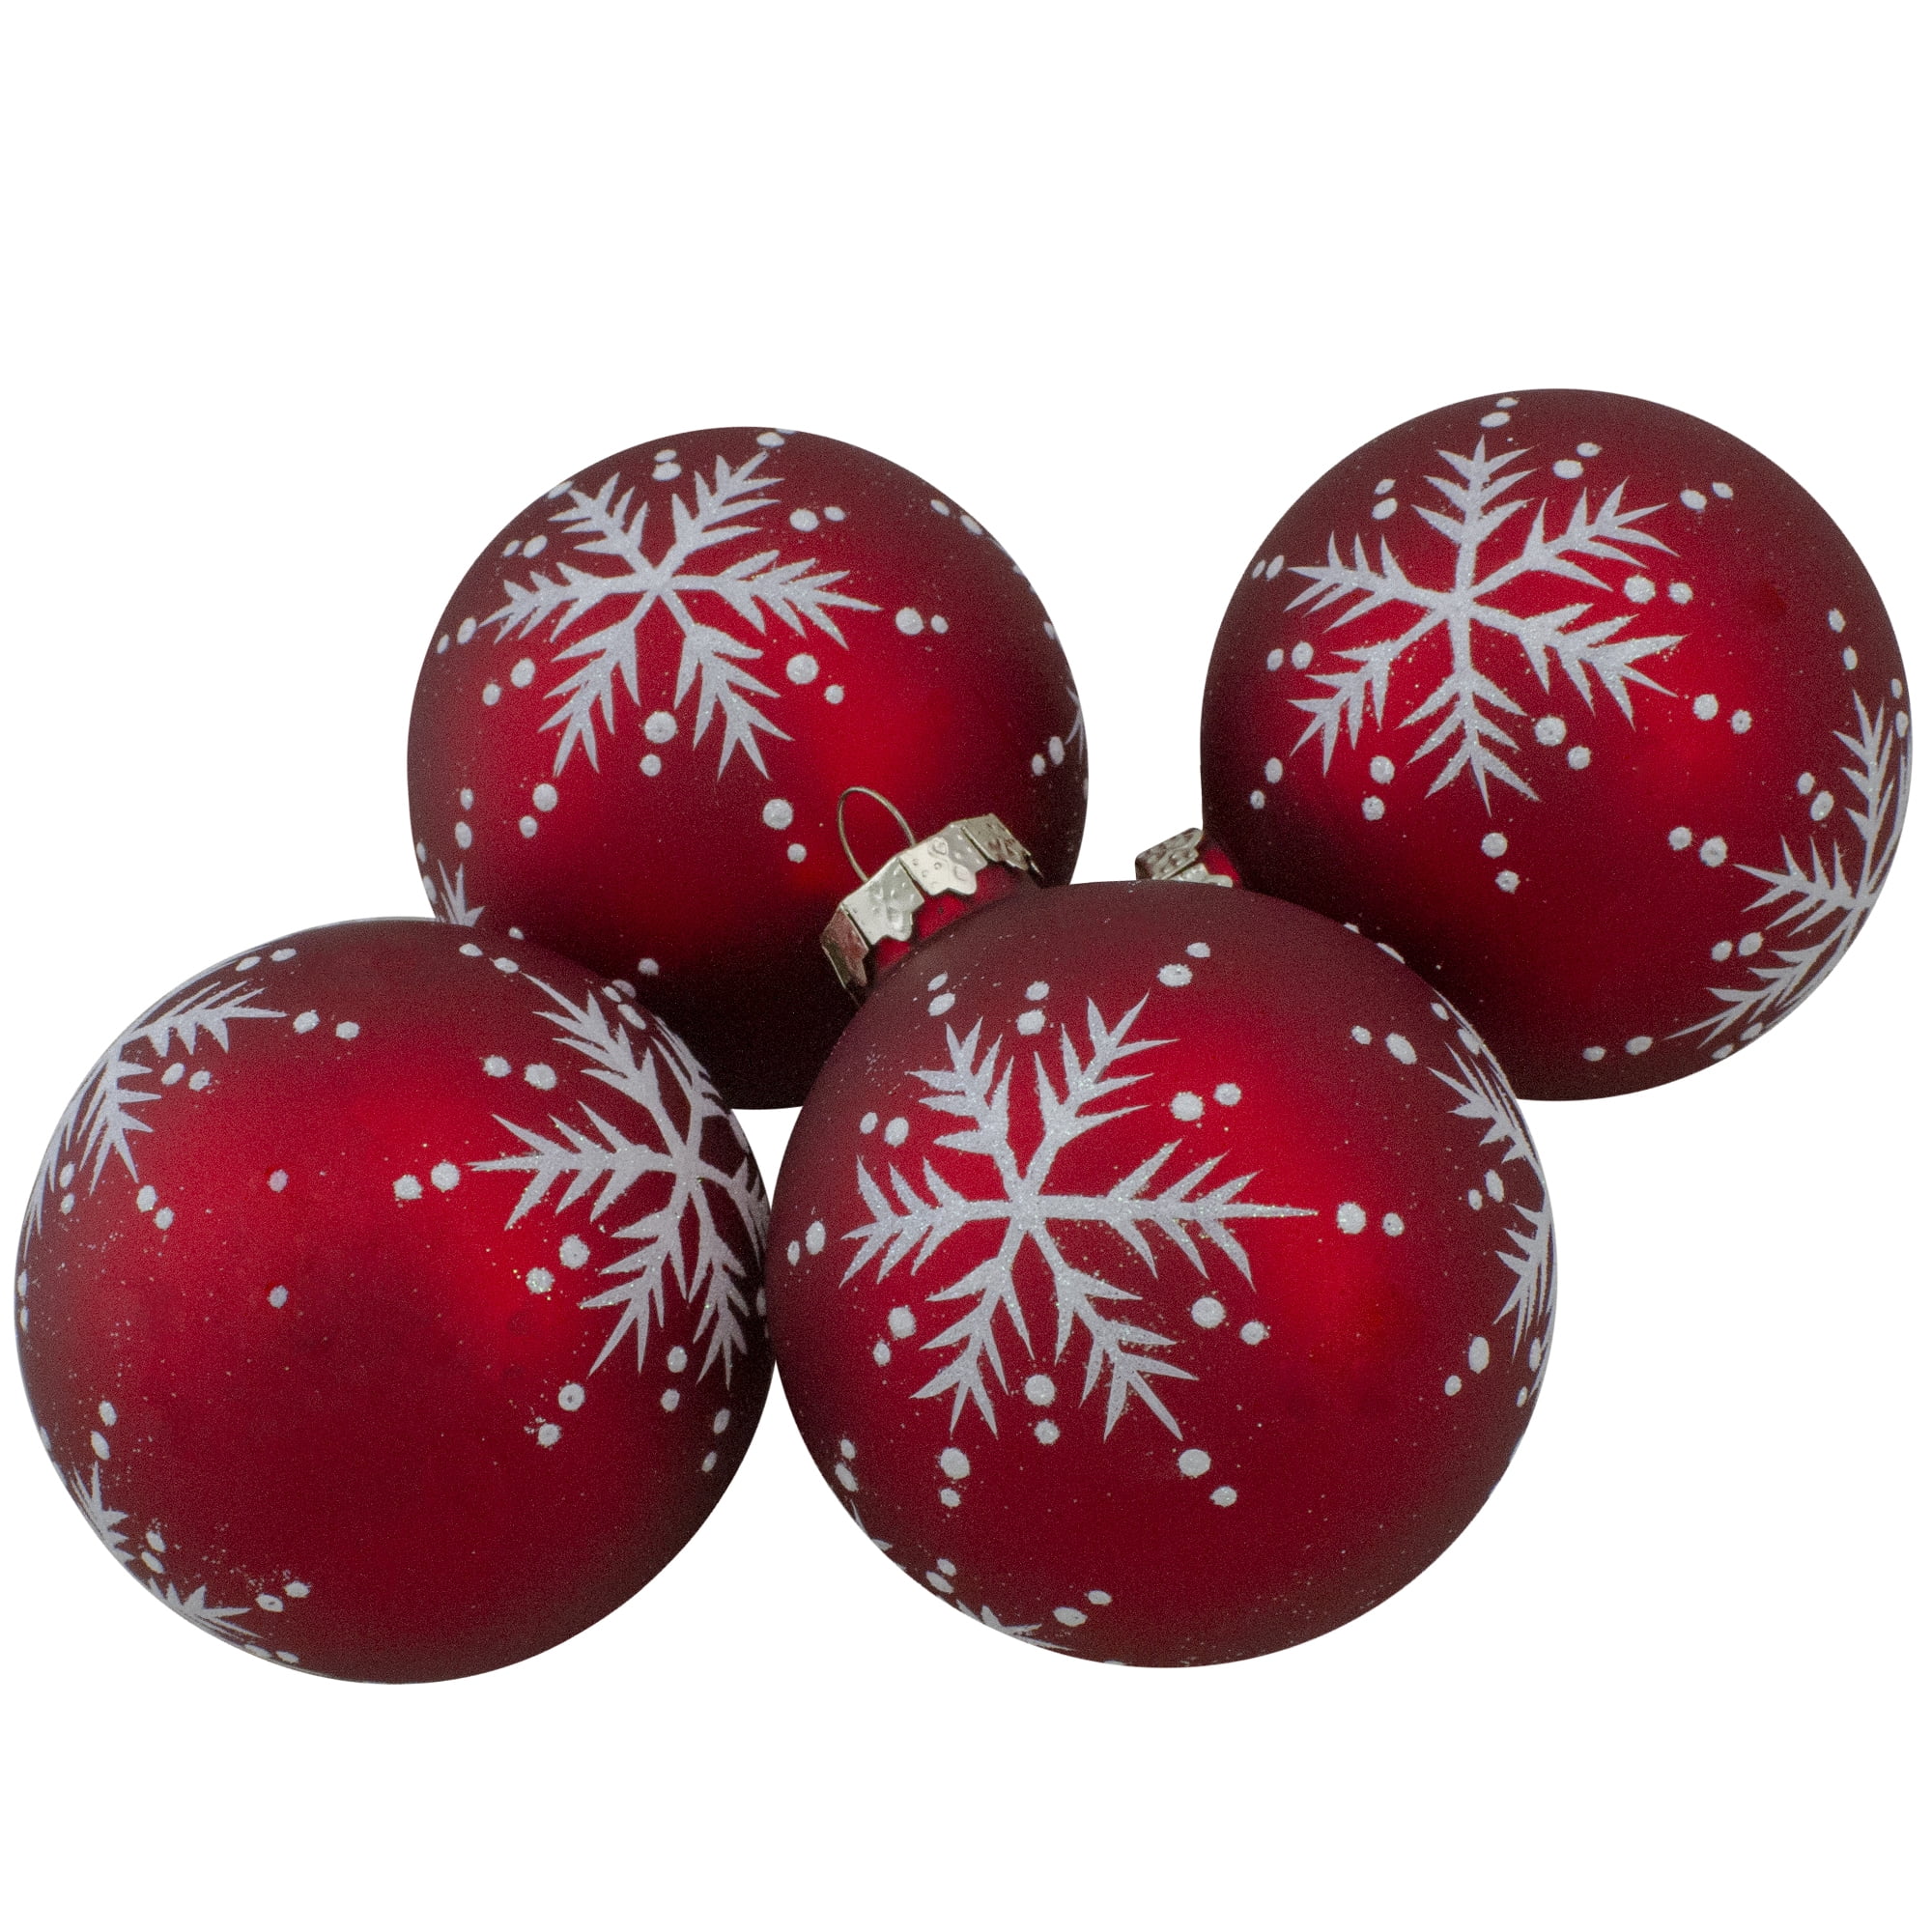 and White Plaid Ball Christmas Ornaments 4 Pack 80mm 3" Red Green 